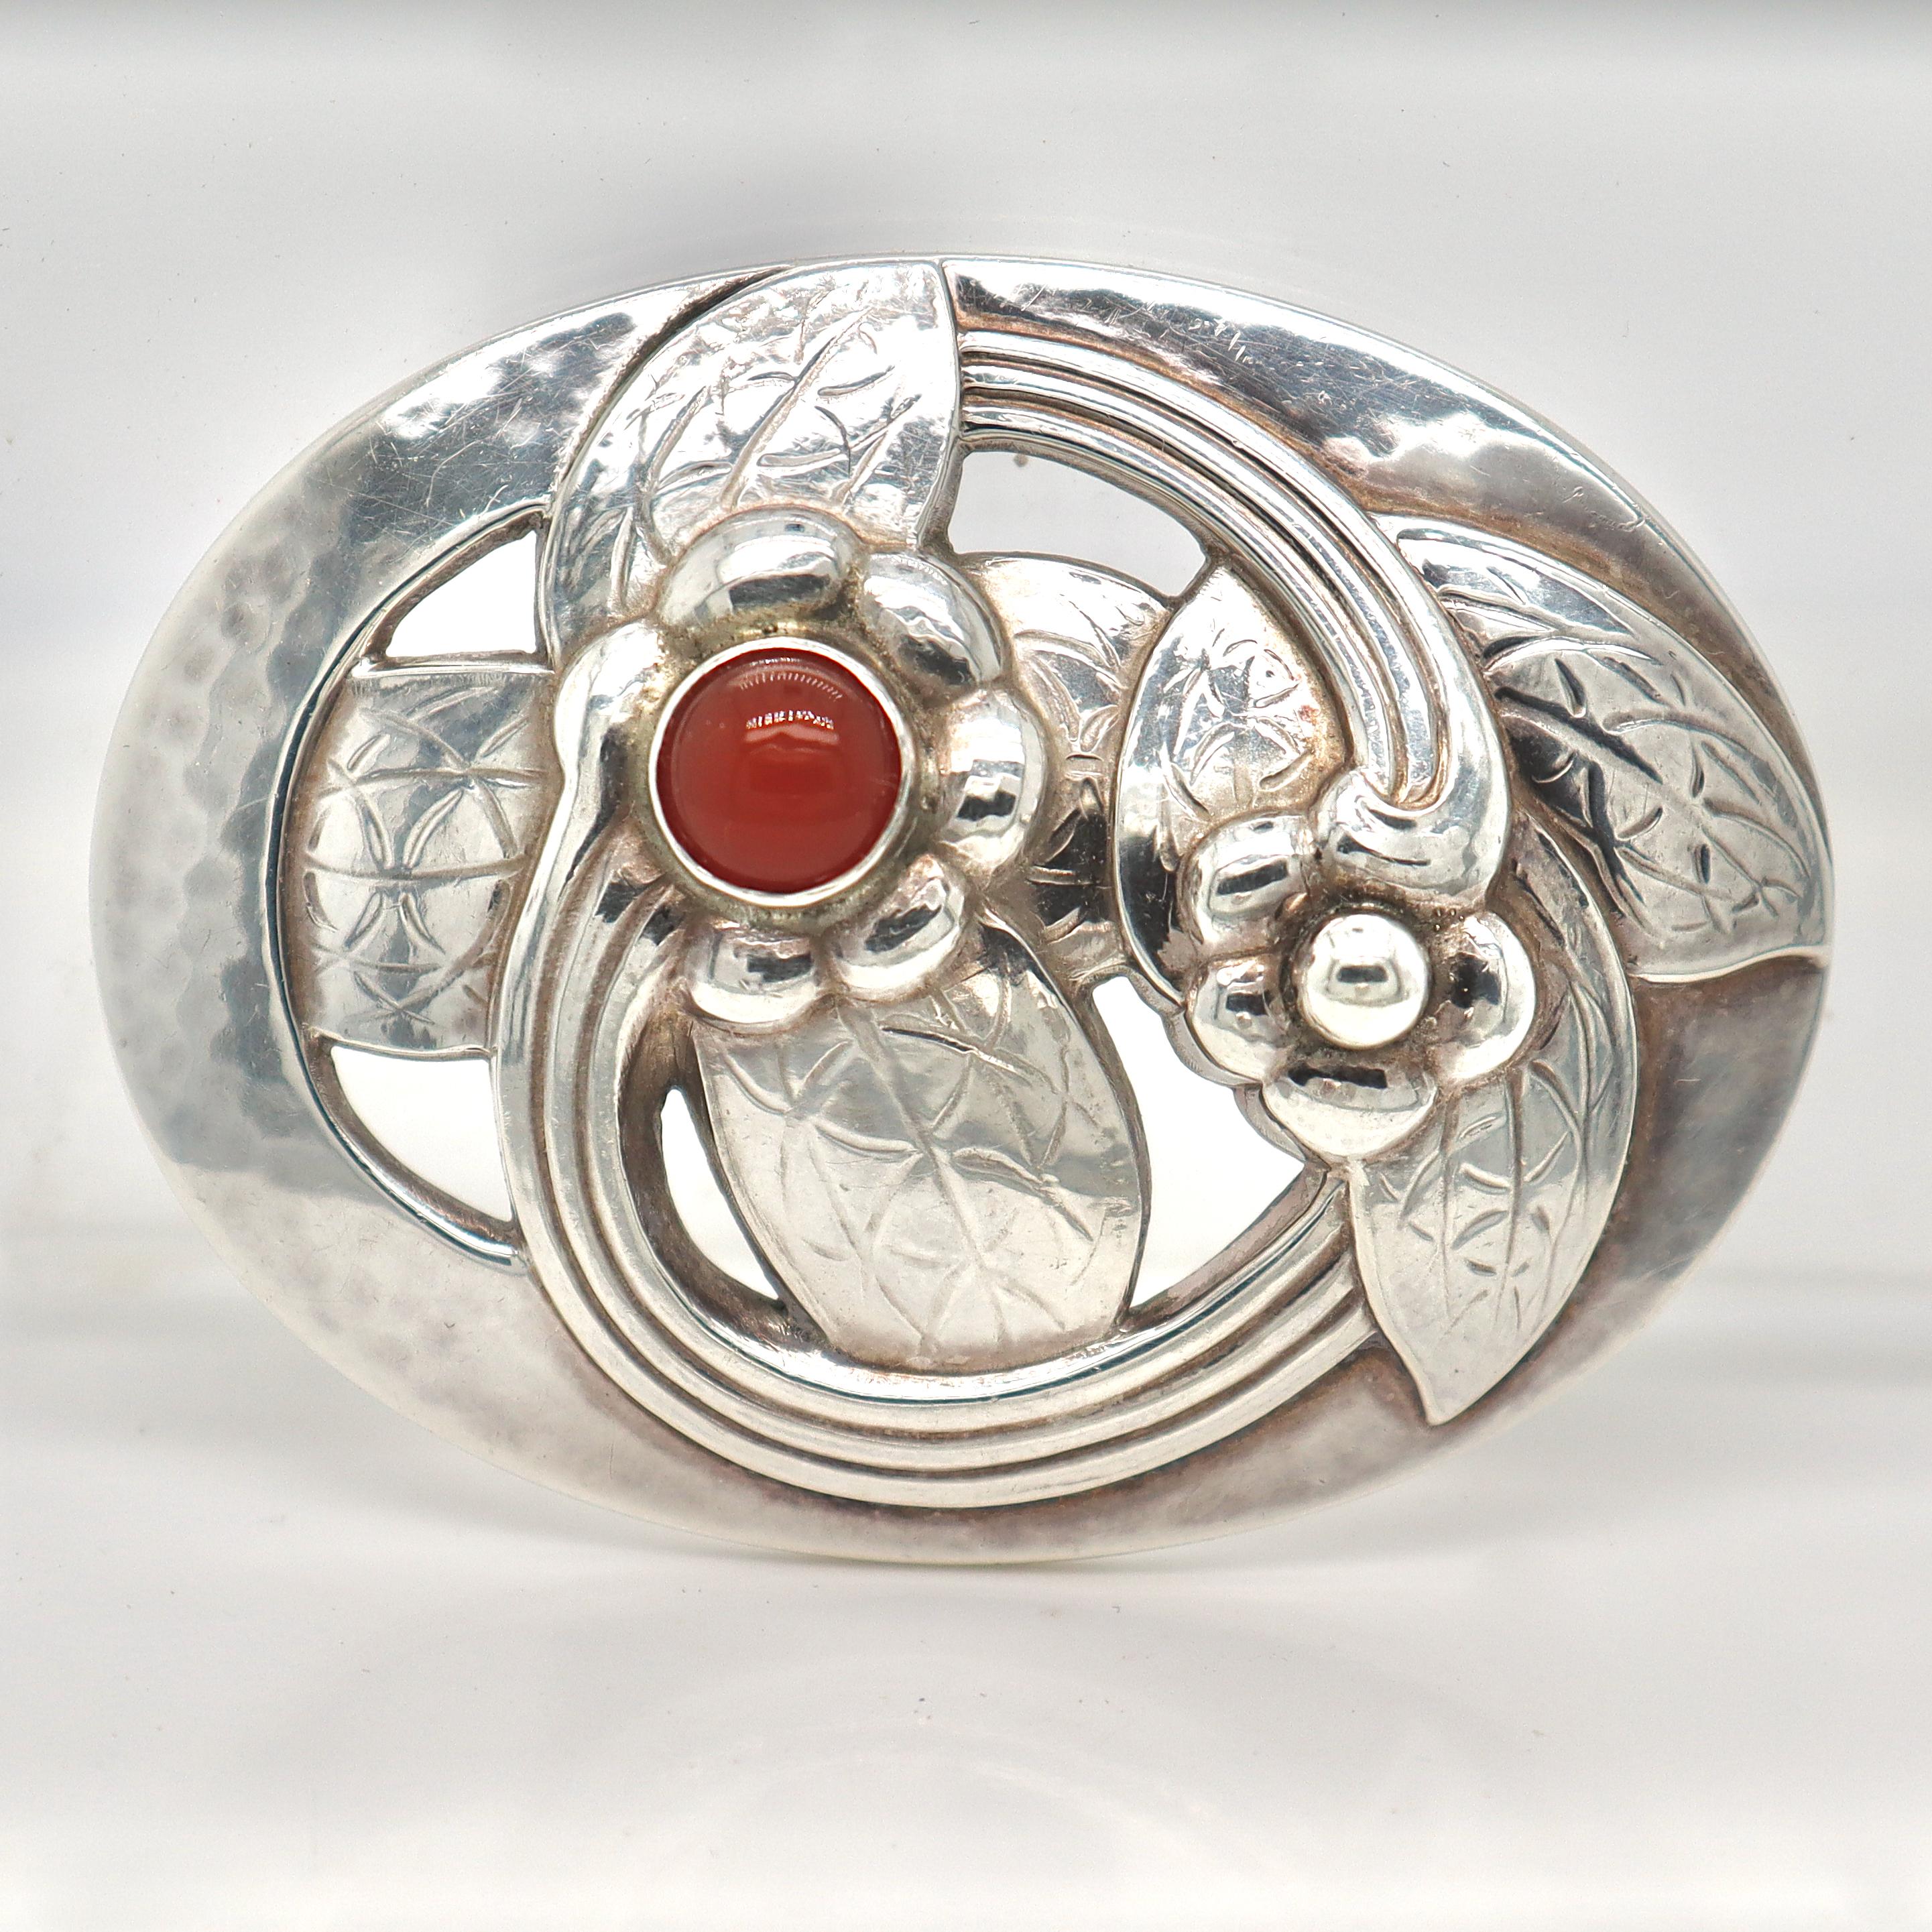 A fine Georg Jensen sterling silver brooch.

Model no. 13. 

In the form of a floral brooch with an amber or carnelian cabochon.

Designed by Georg Jensen.

Simply a wonderful brooch from one of Denmark's premier silversmiths!

Date:
20th Century,